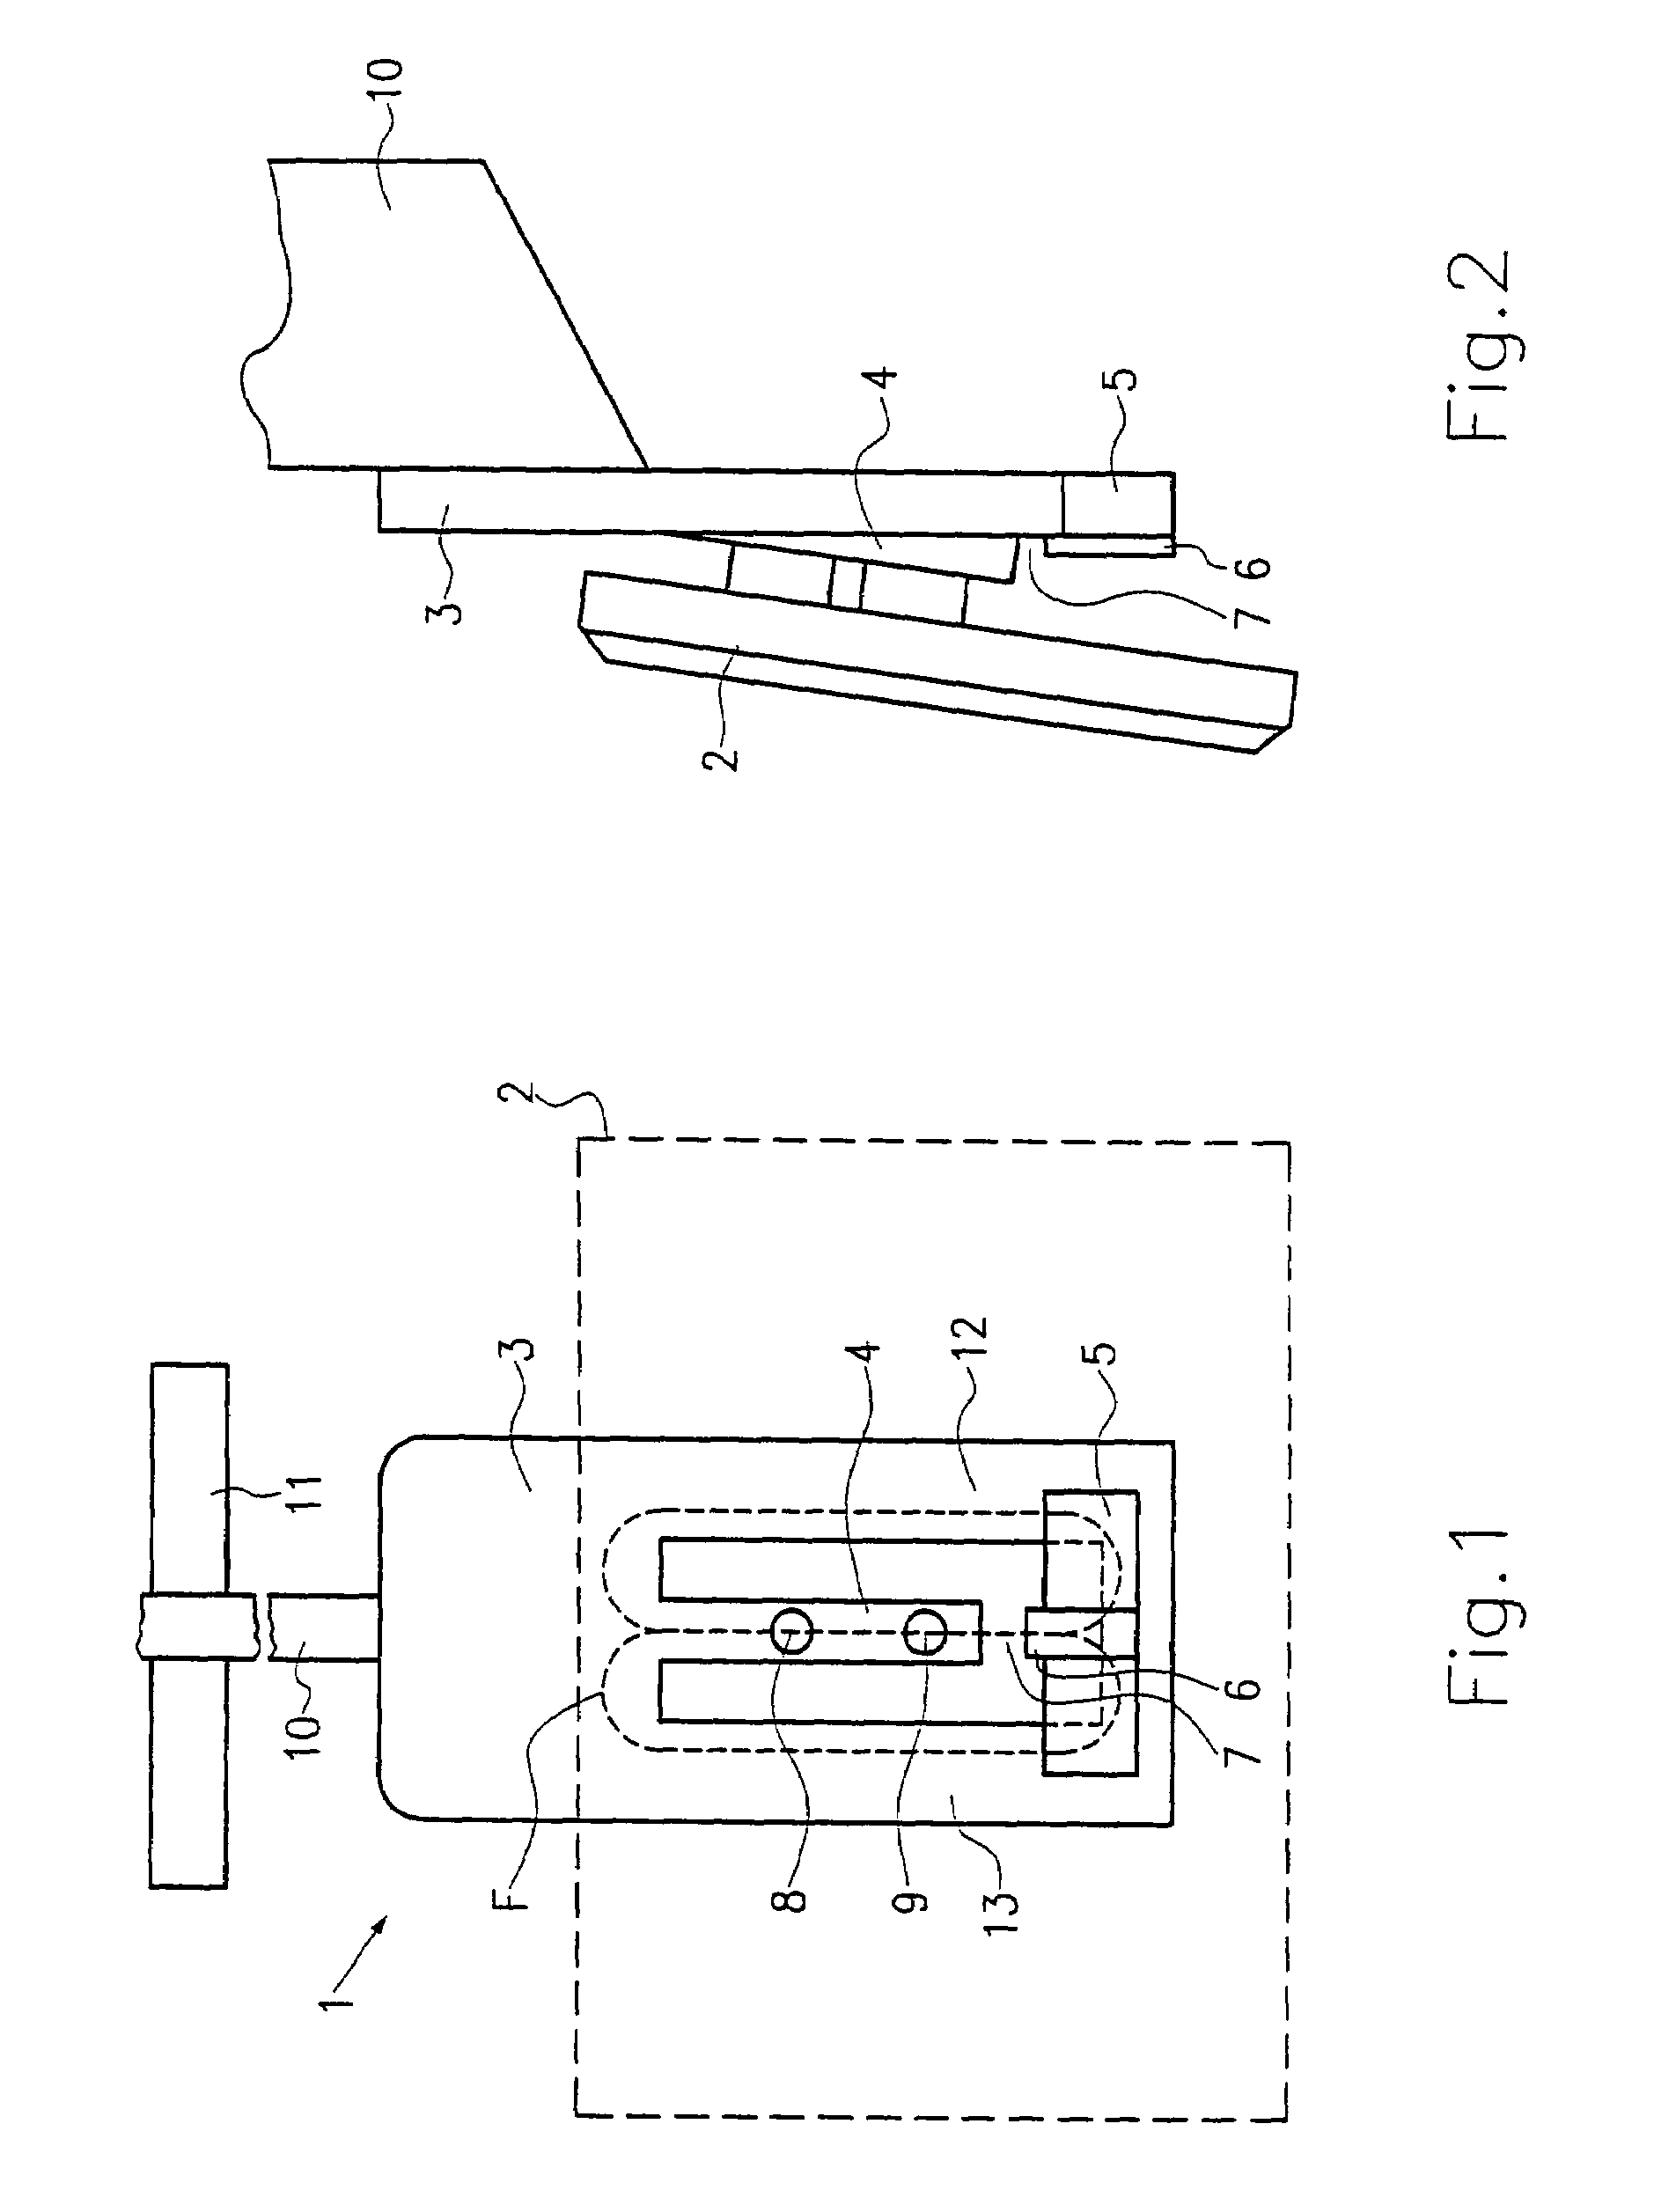 Measuring instrument and method for detecting a force